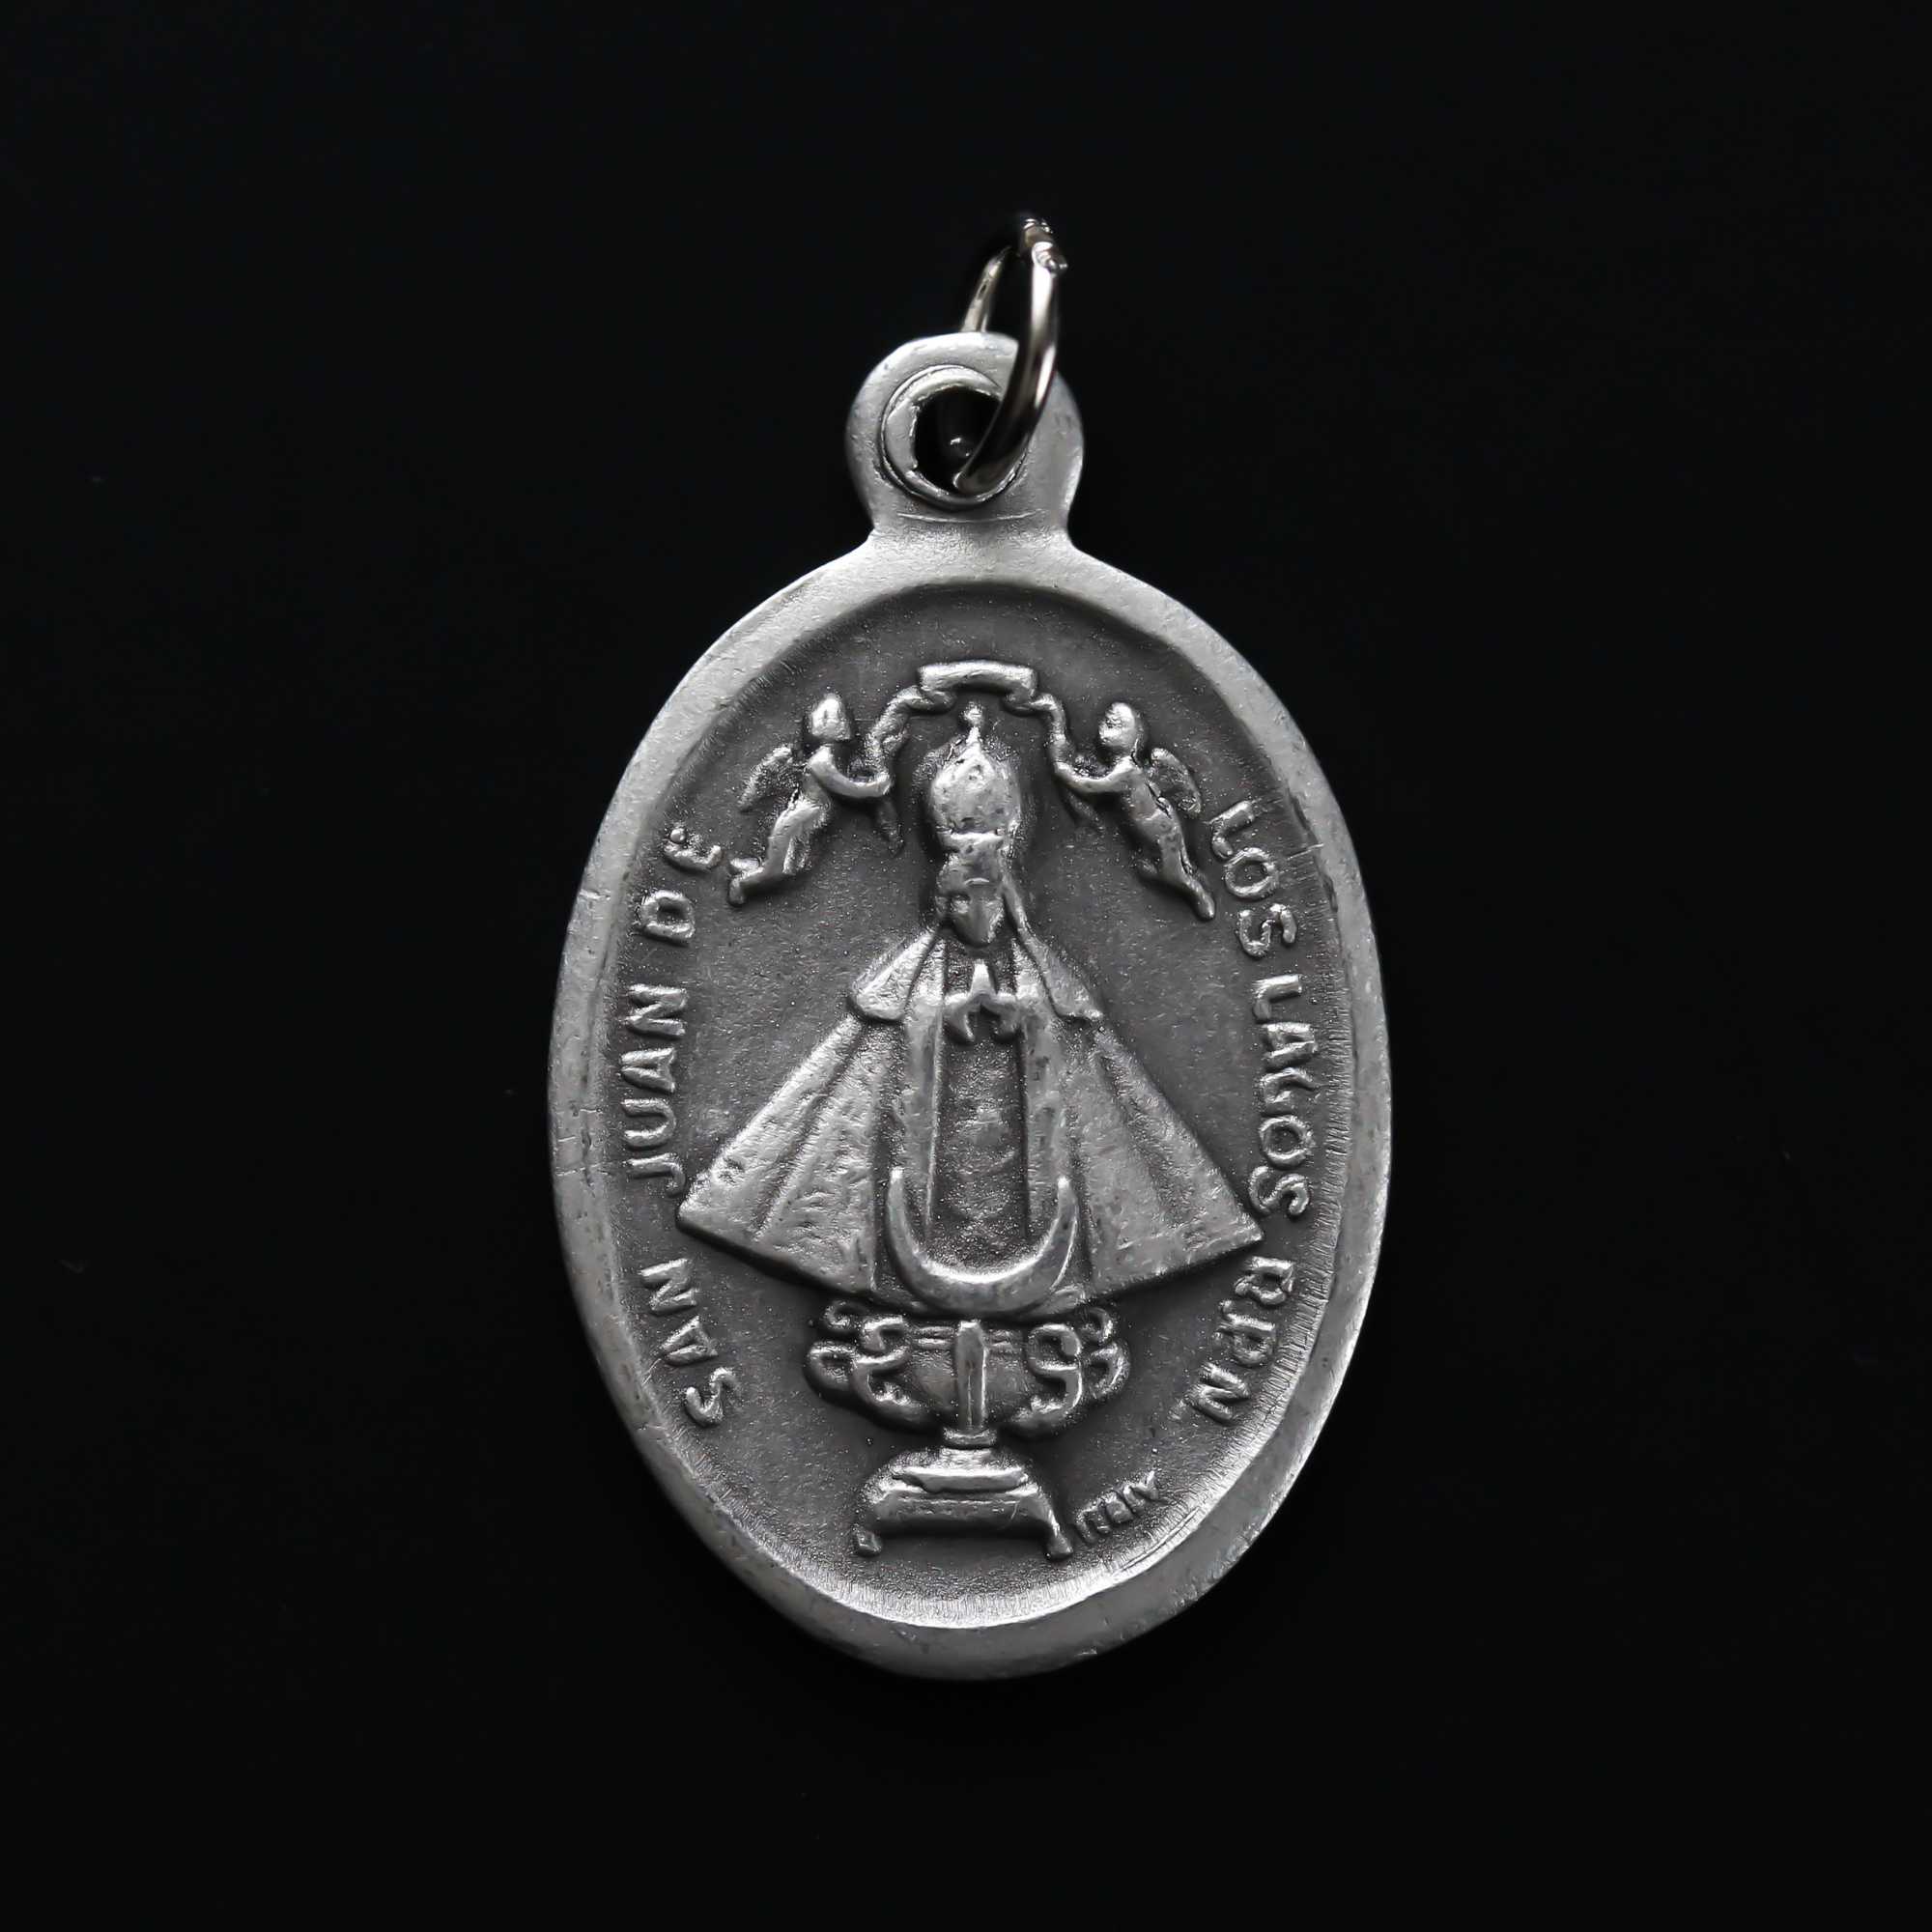 Our Lady of San Juan de Los Lagos medal that depicts the image of Our Lady on the front and the Sacred Heart of Jesus on the back